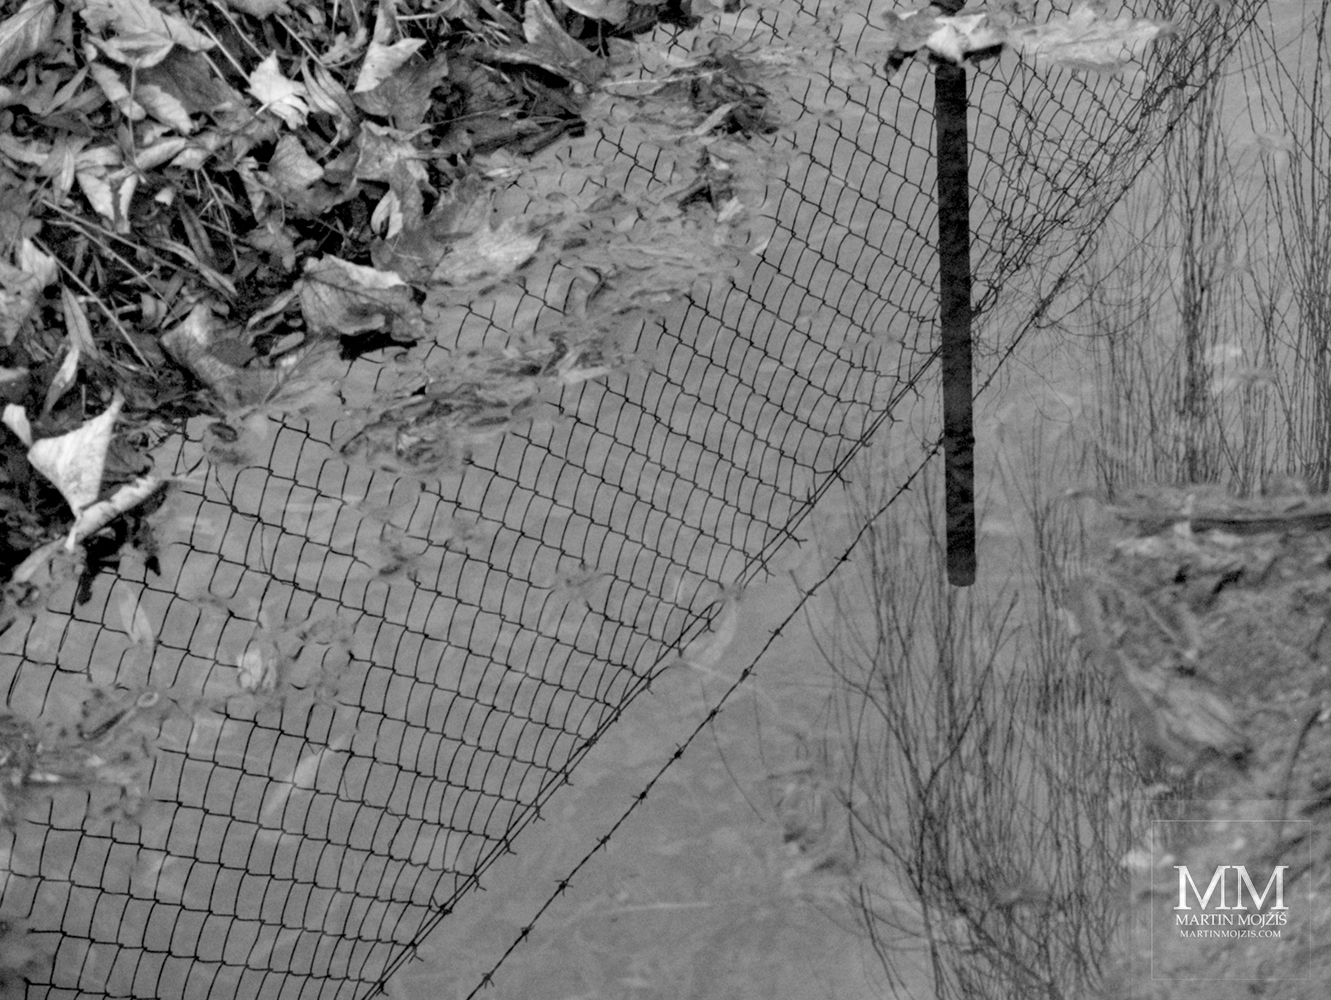 Reflection of a wire fence on the surface of a puddle. Photograph with the title IN THE FENCE II.